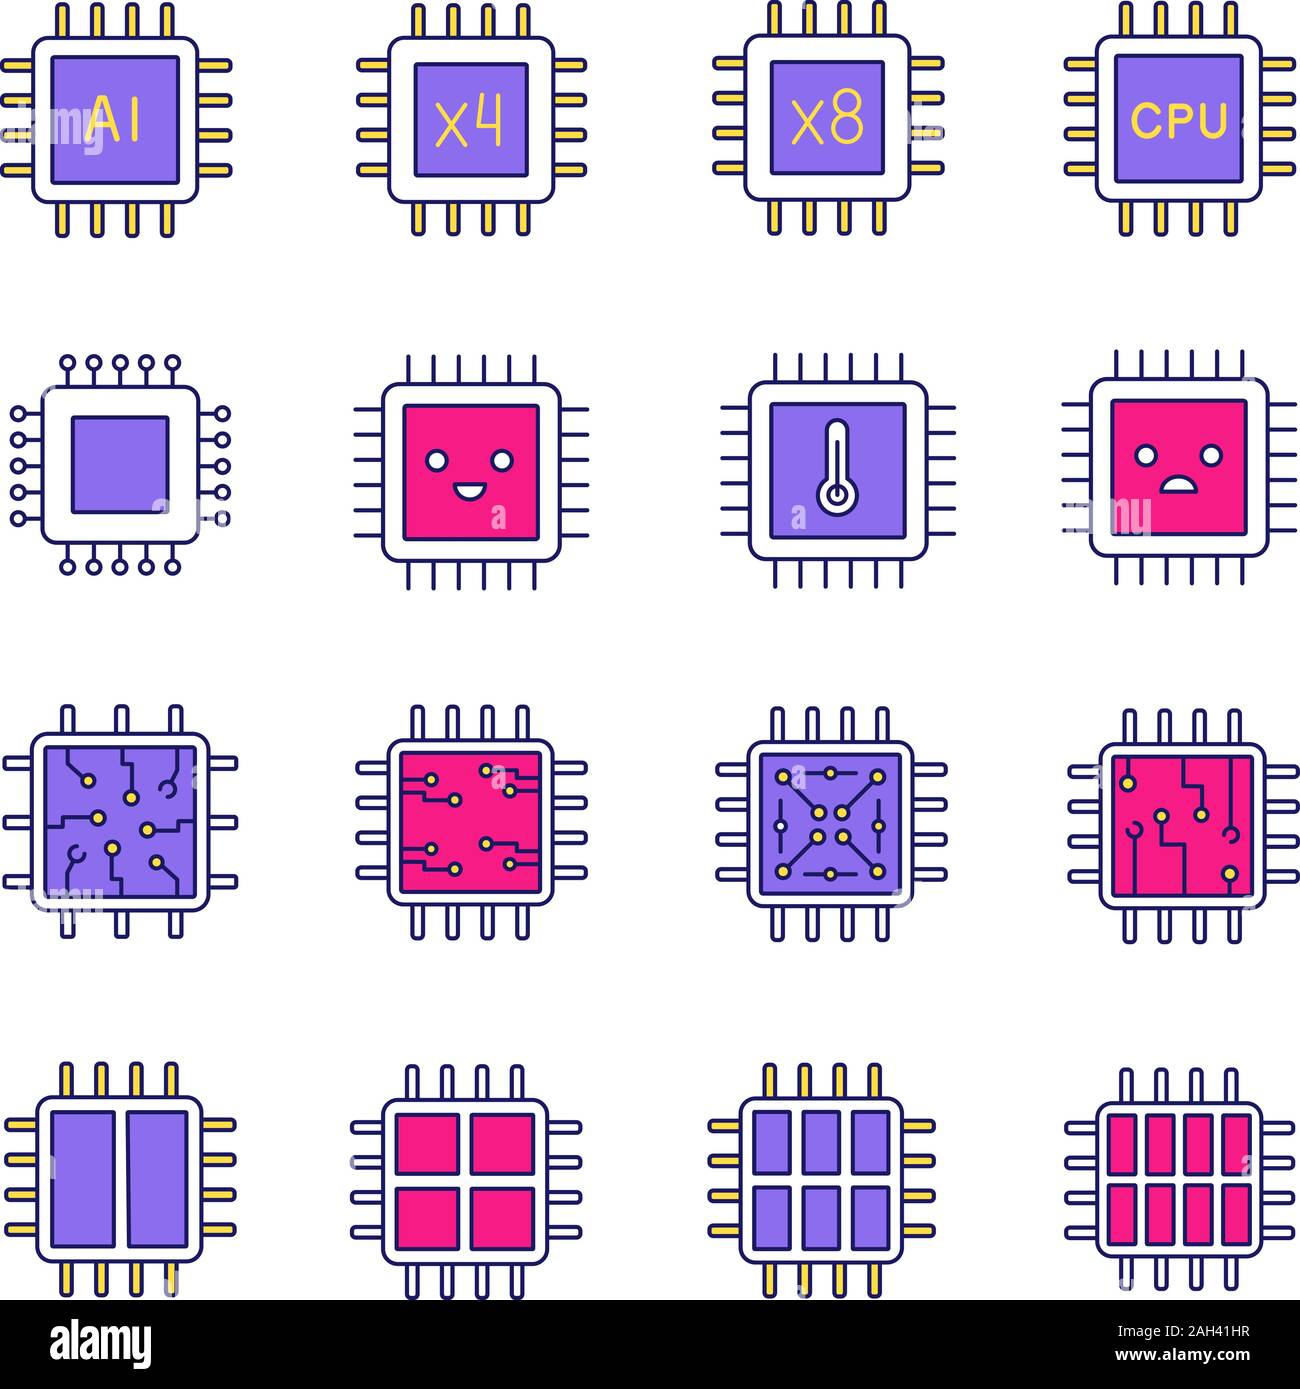 Processors color icon. Multi-core processors. Chips, microchips, chipsets. CPU. Central processing units. Integrated circuits. Isolated vector illustr Stock Vector